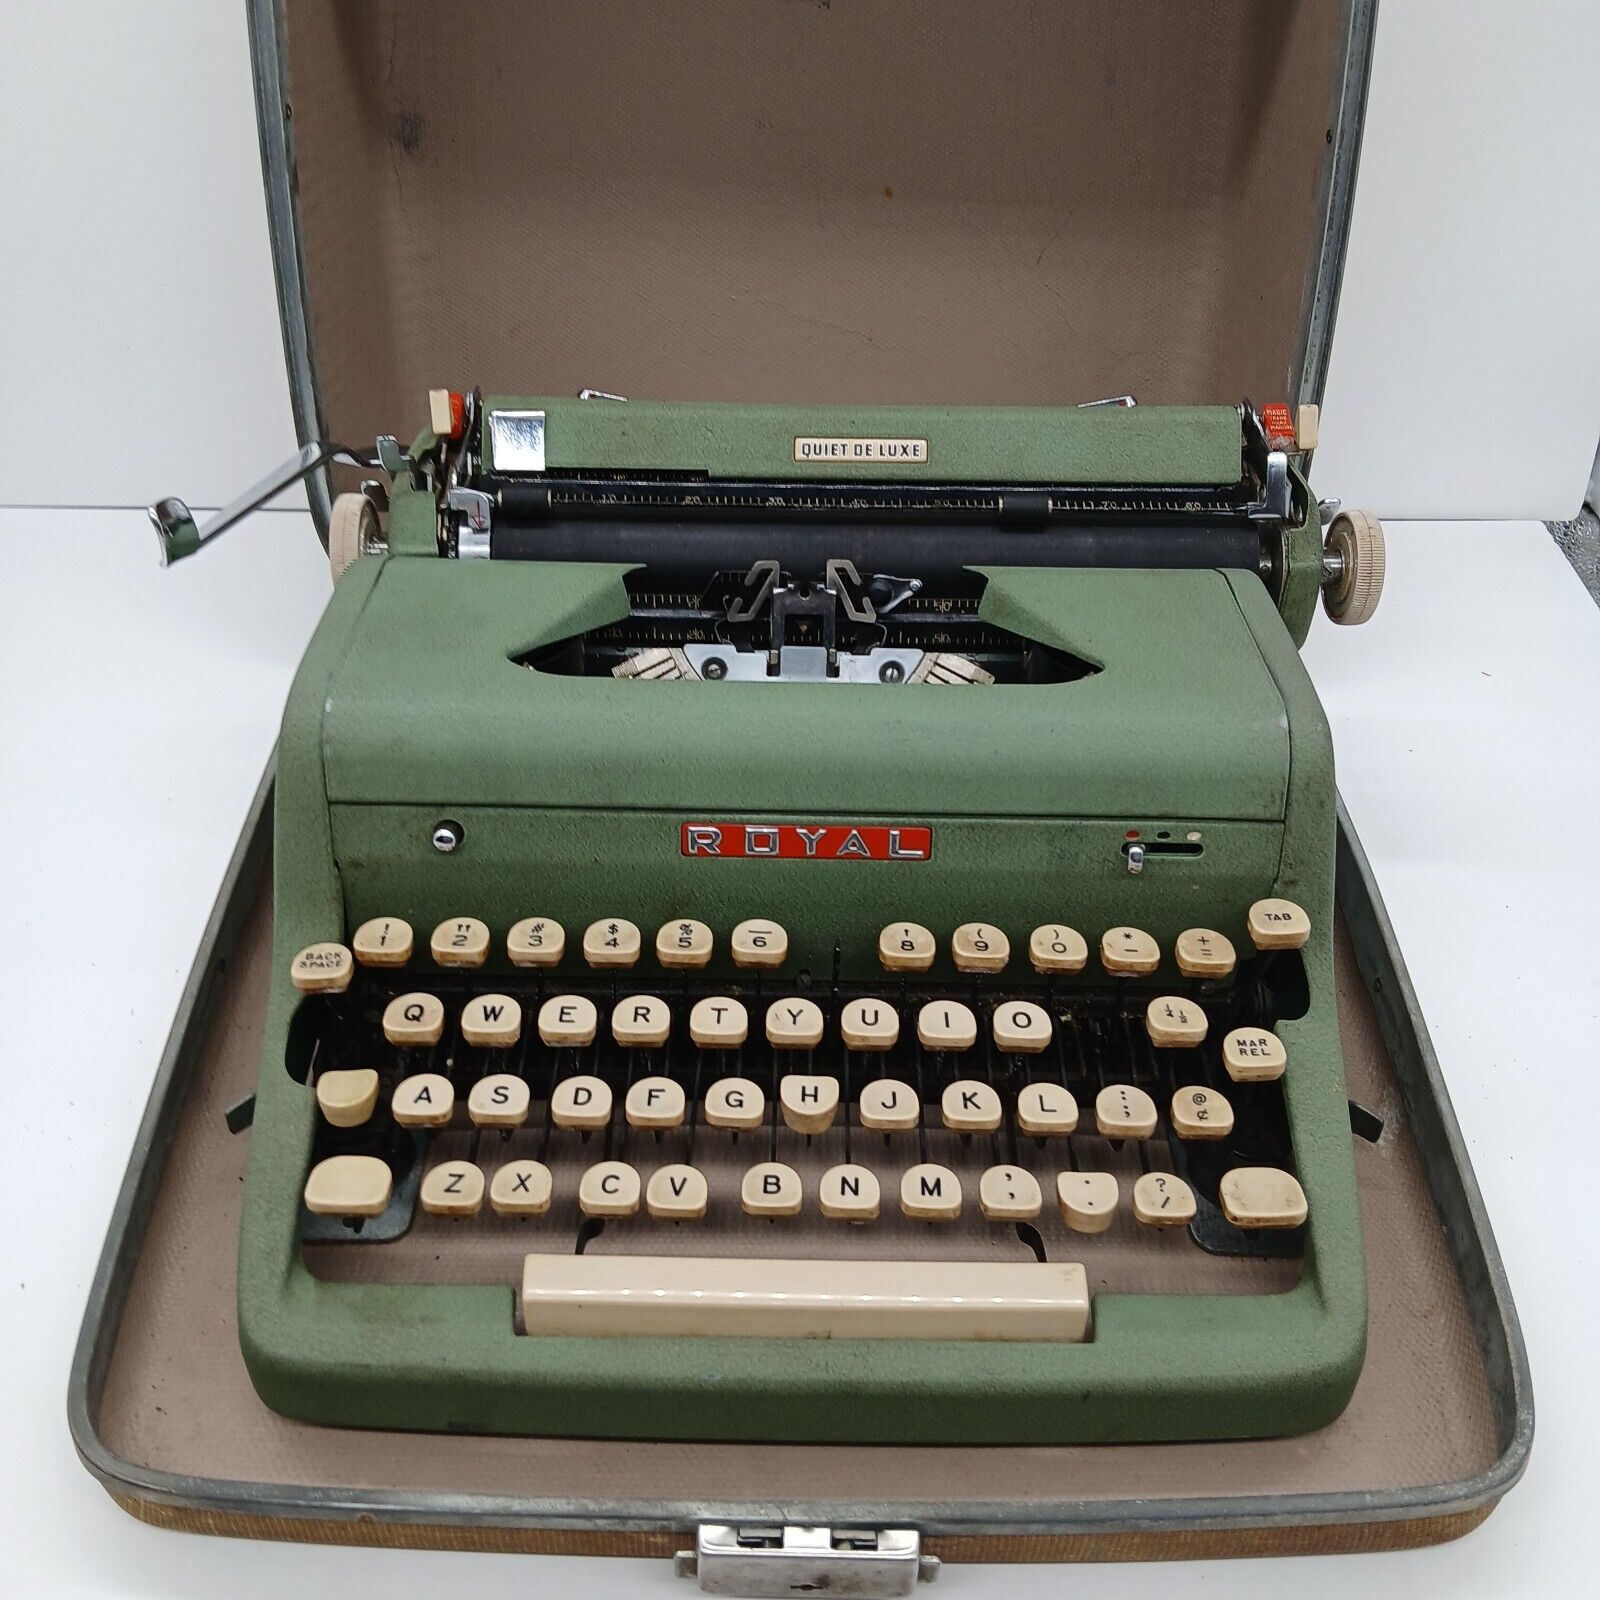 Vintage Royal Quiet De Luxe Portable Typewriter Green with Tweed Case 1950s